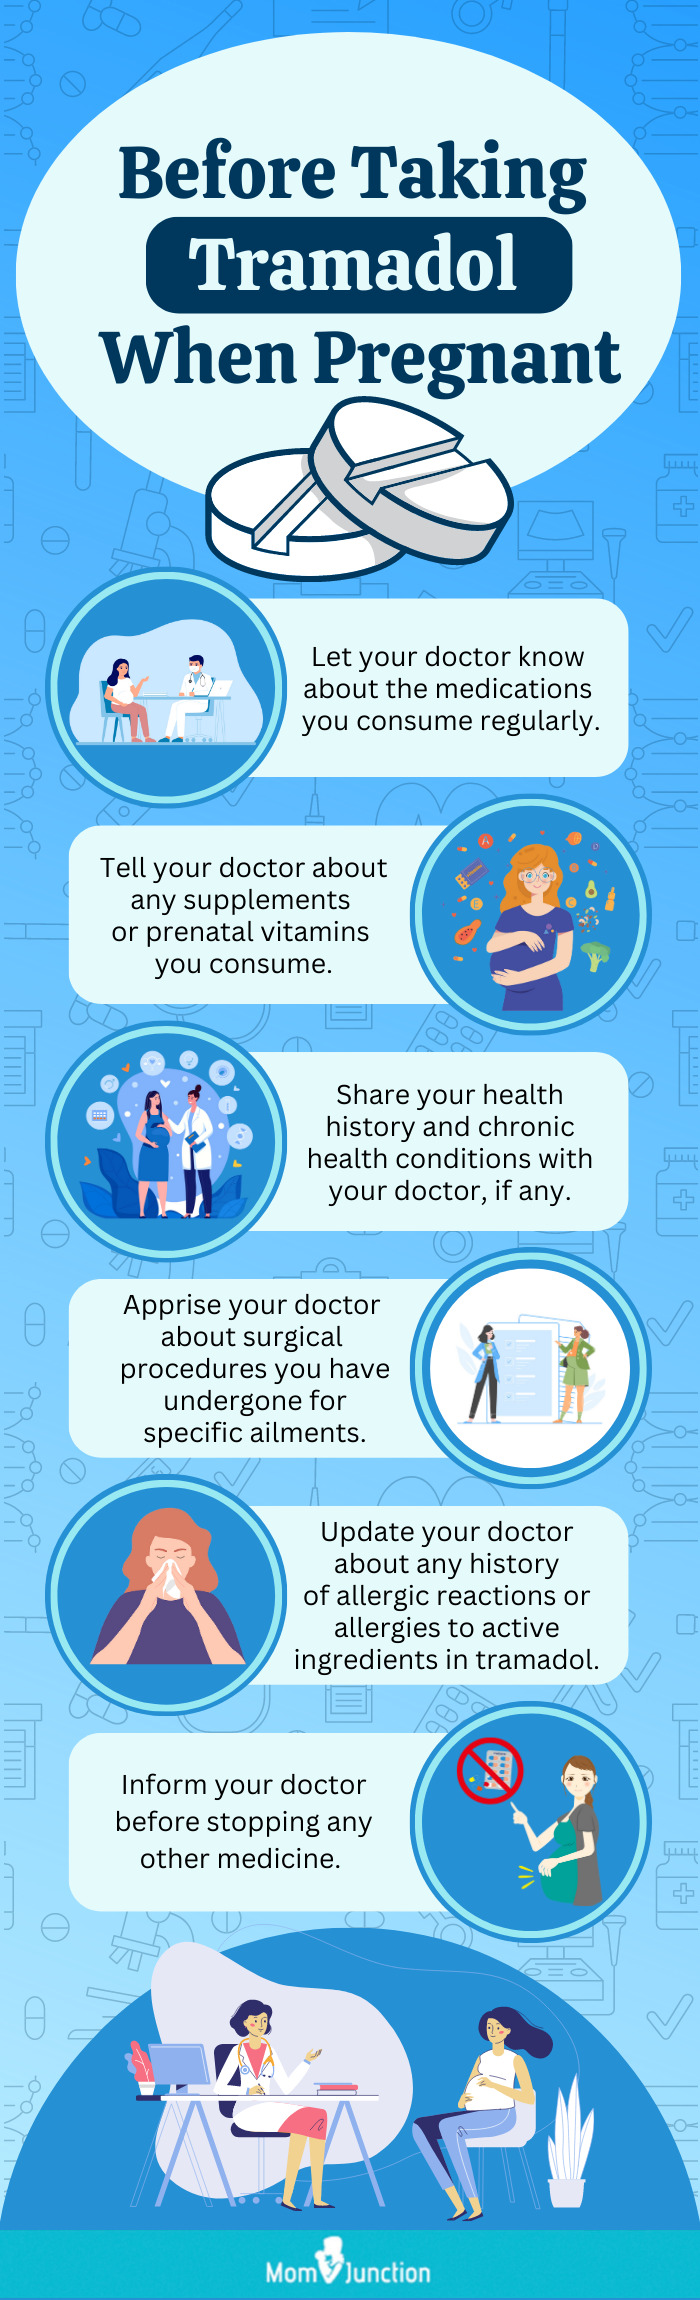 precautions for taking tramadol in pregnancy (infographic)